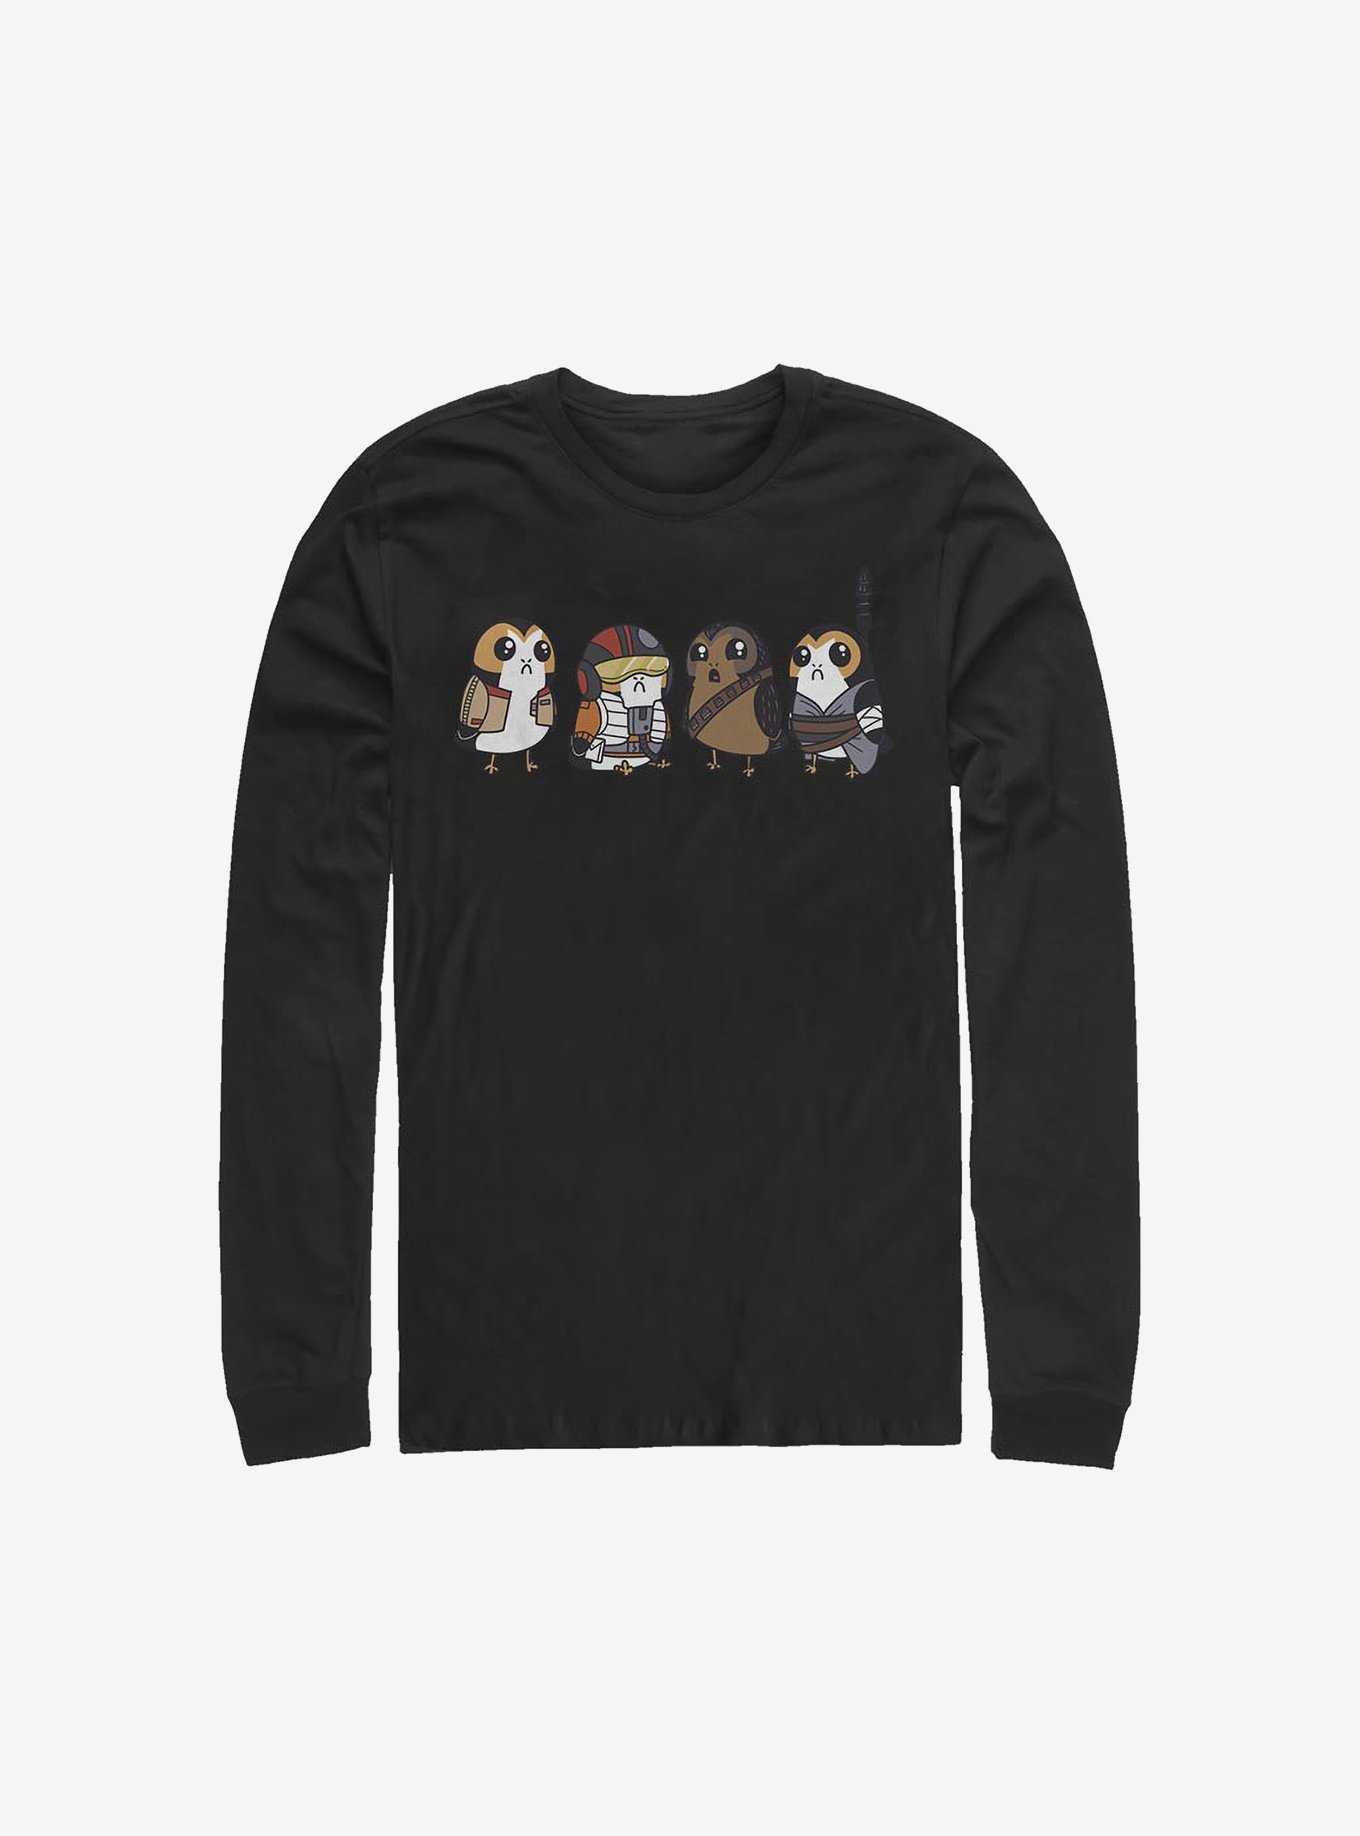 Star Wars: The Last Jedi Porgs As Characters Long-Sleeve T-Shirt, , hi-res